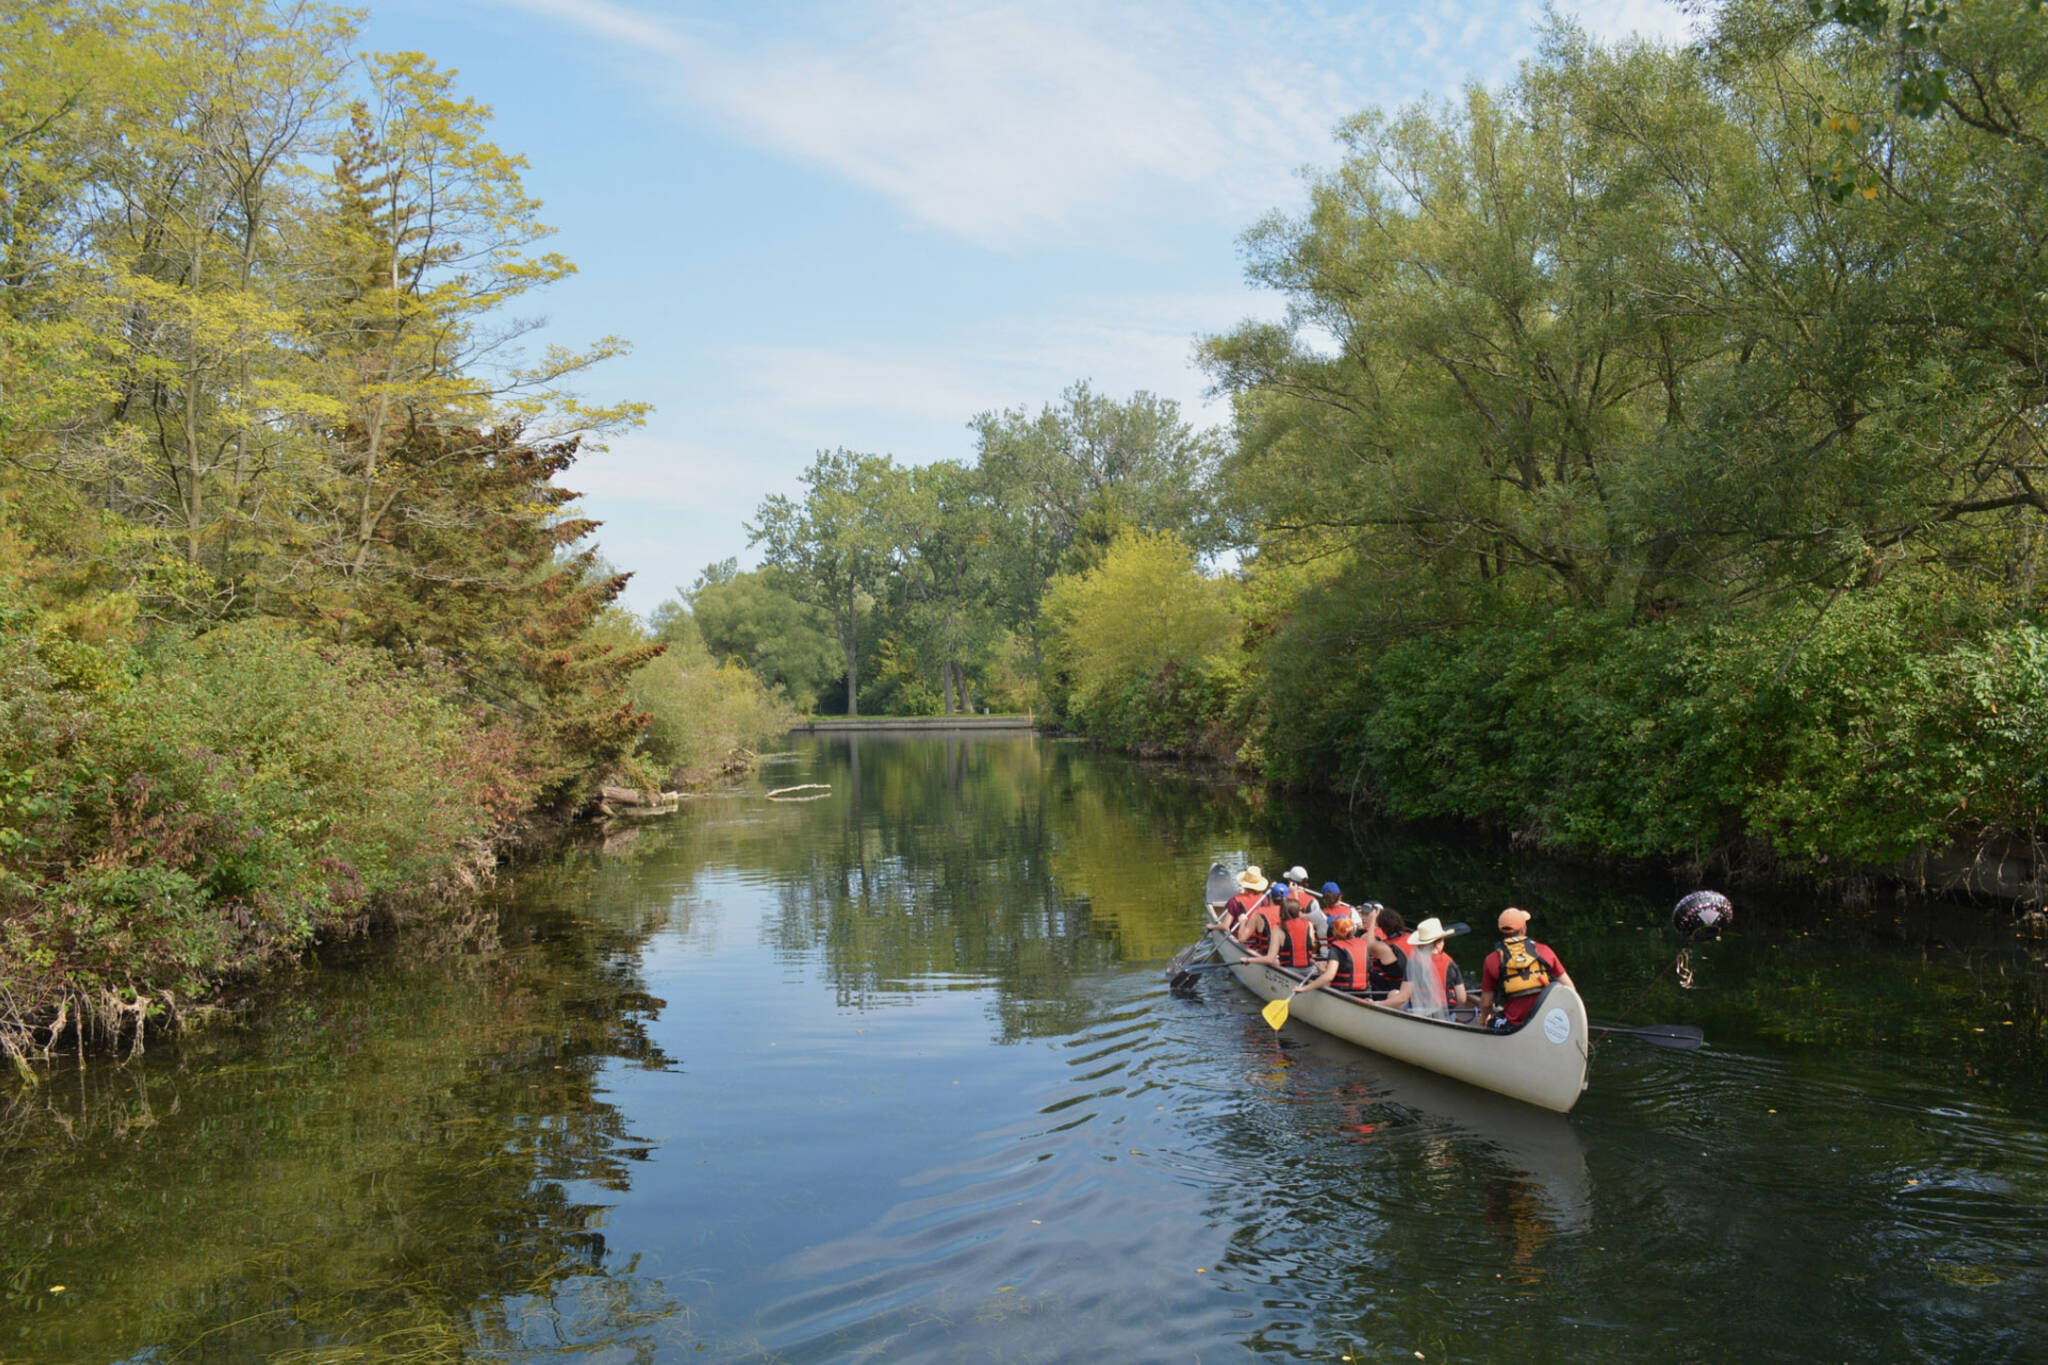 Canoeing in Toronto is easier than you think